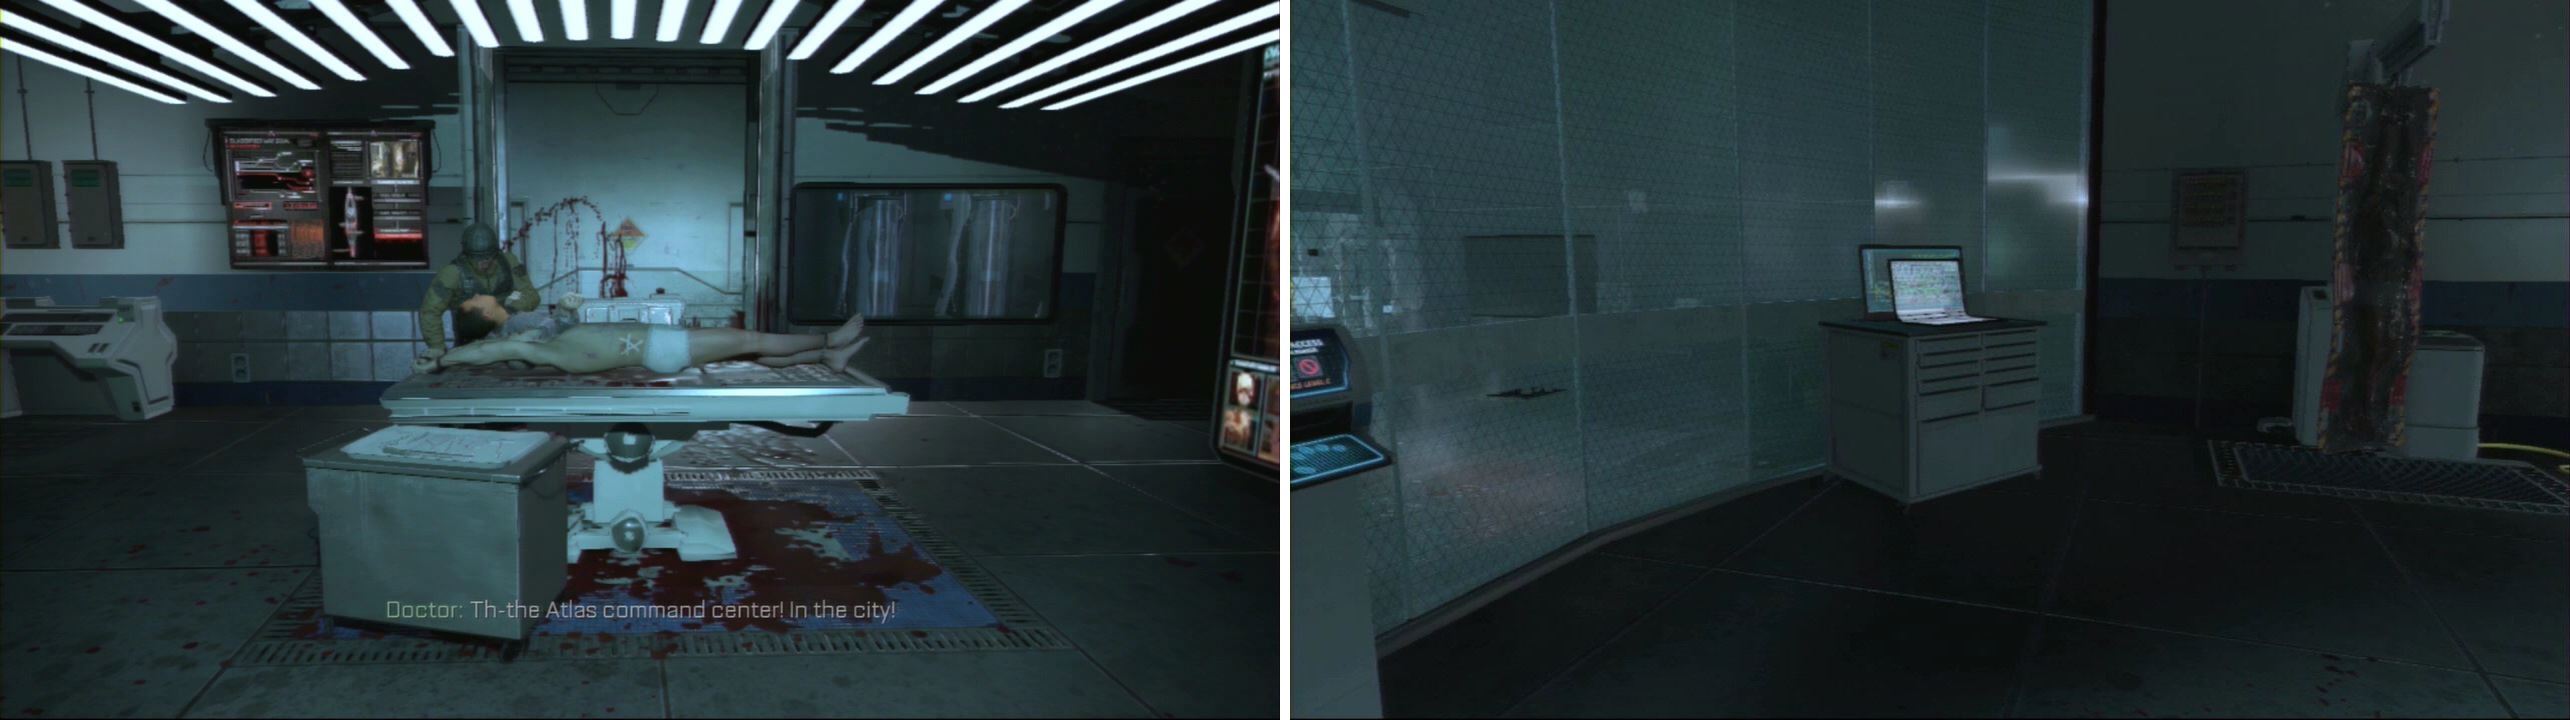 In the small room where Gideon gets shot, grab the intel from the left side before leaving or having the enemies come in.